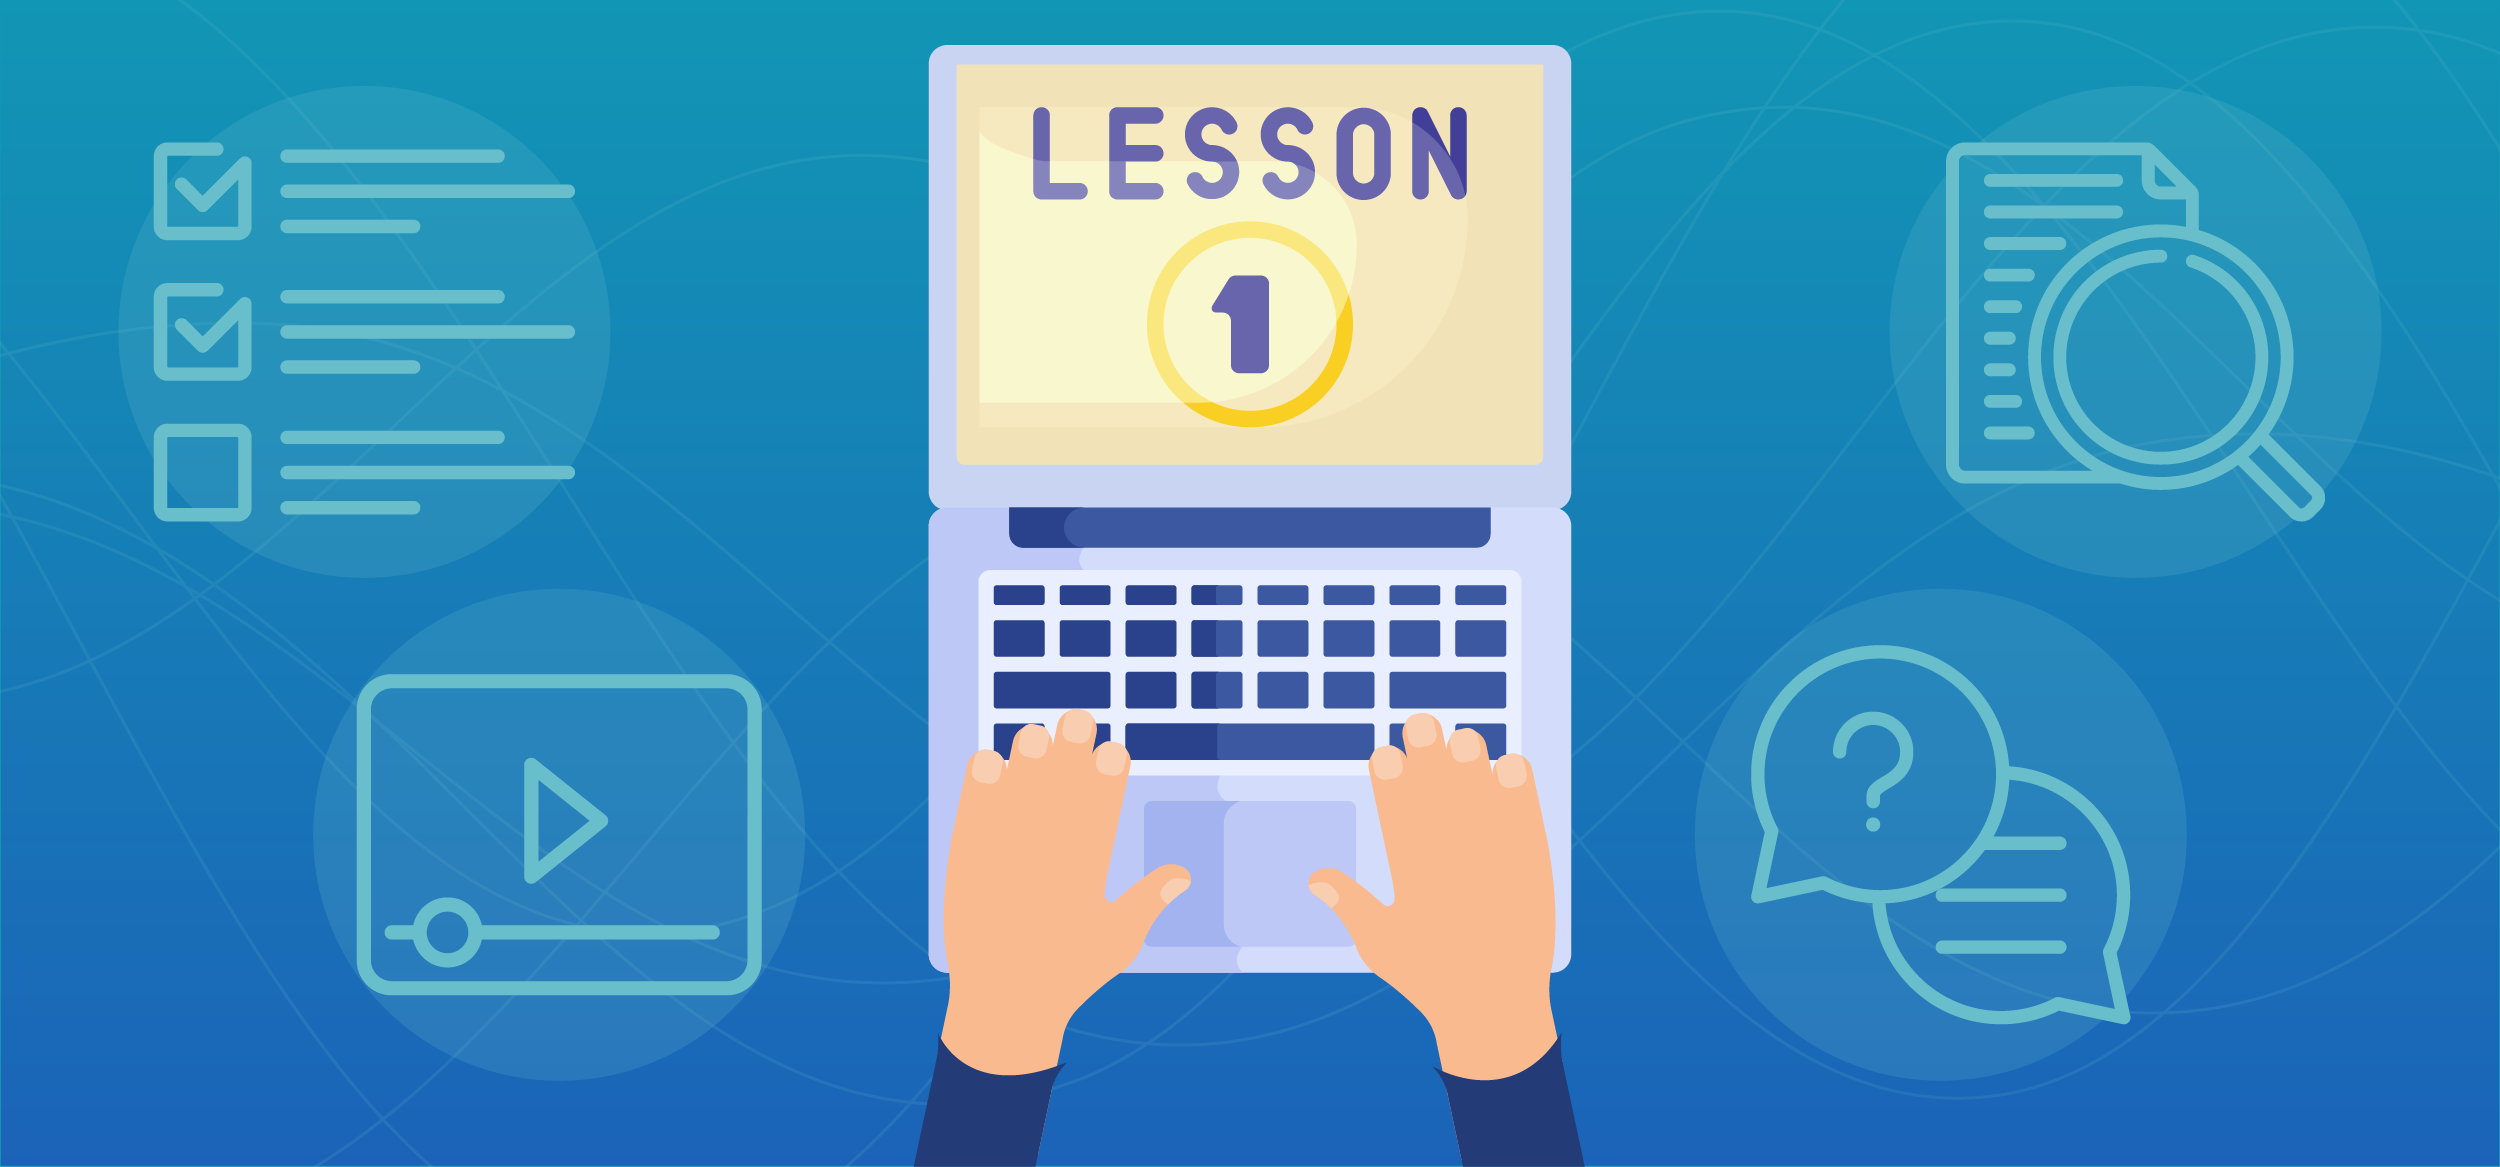 Three simple steps for creating lesson plans